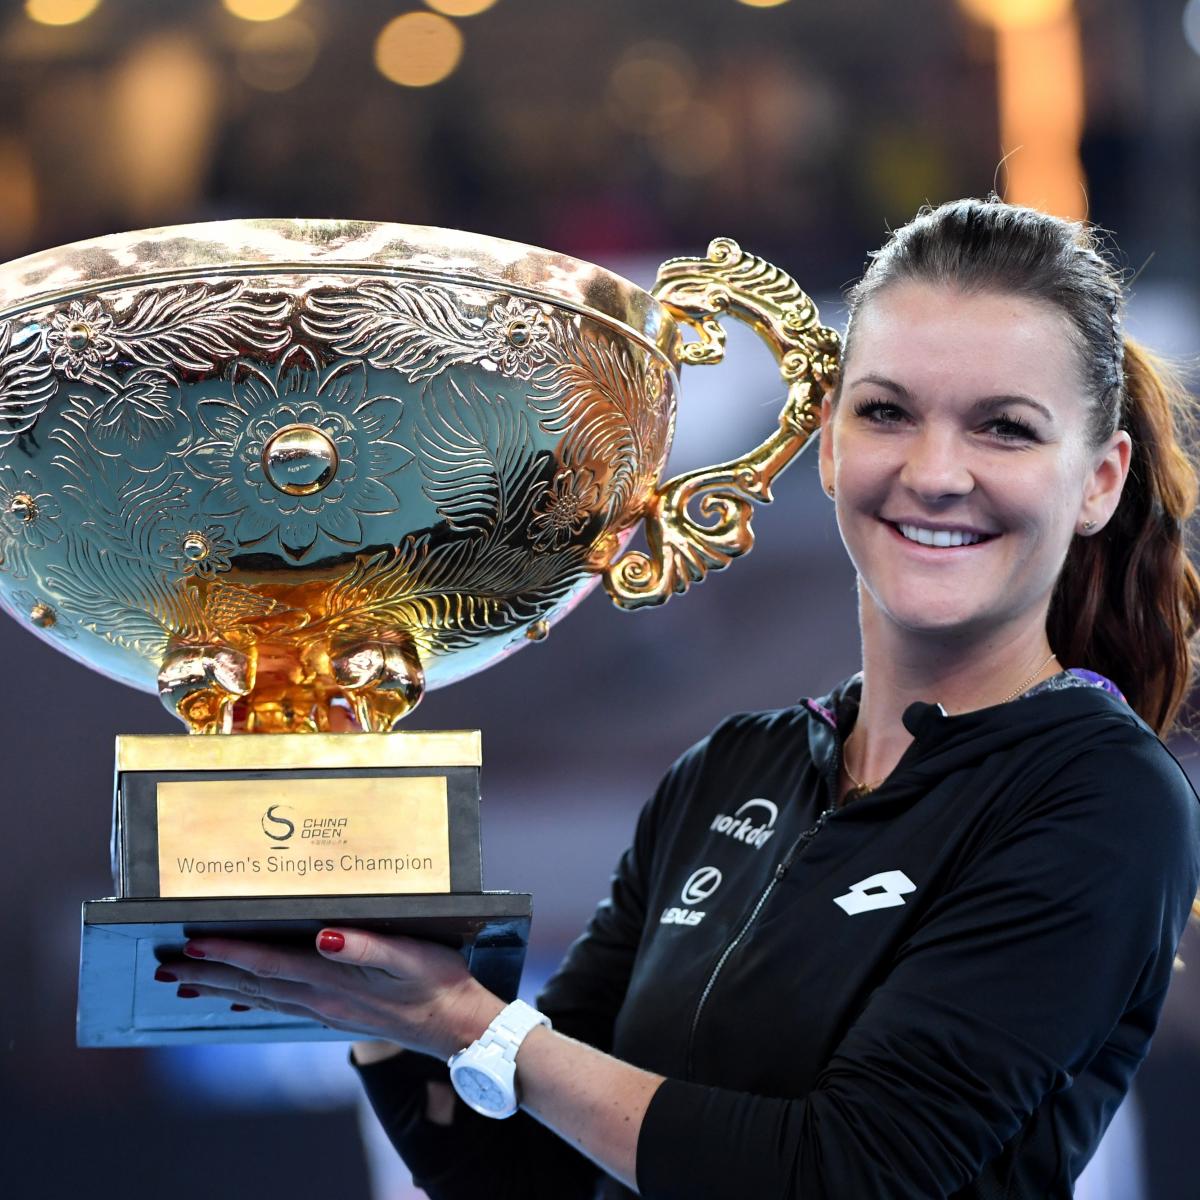 Andy Murray and Agnieszka Radwanska Top Winners and Losers in China